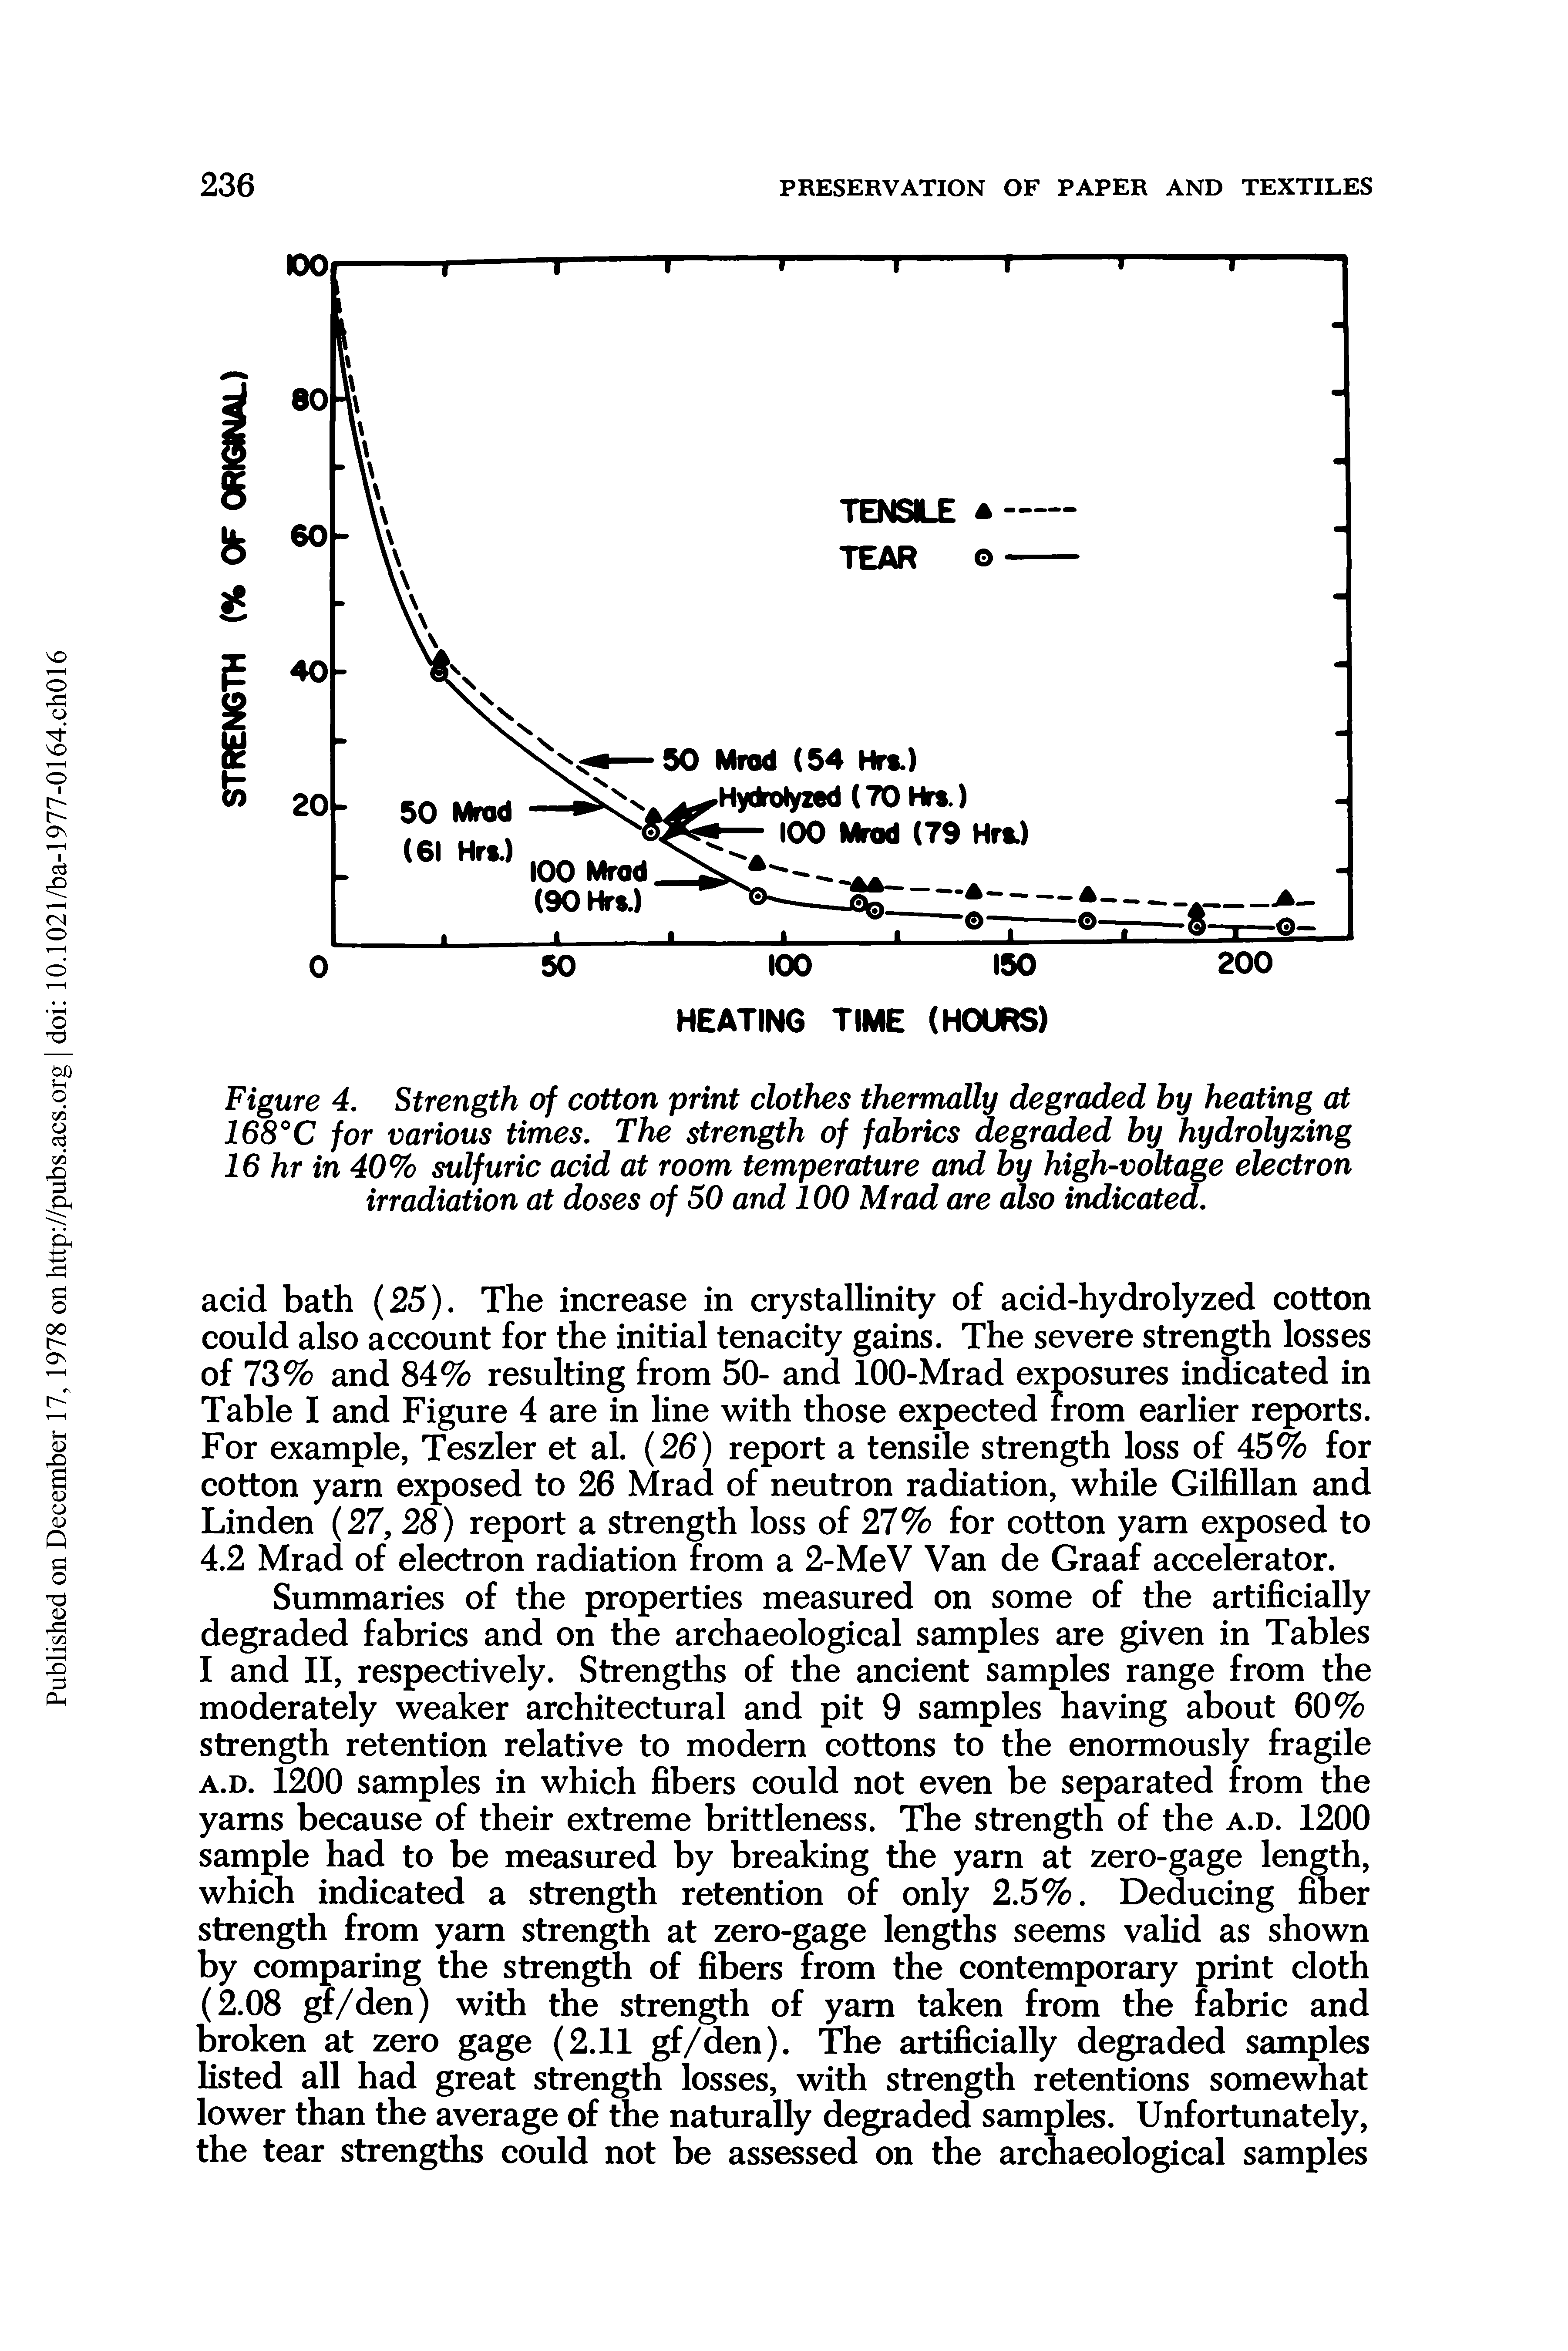 Figure 4. Strength of cotton print clothes thermally degraded by heating at 168°C for various times. The strength of fabrics degraded by hydrolyzing 16 hr in 40% sulfuric acid at room temperature and by high-voltage electron irradiation at doses of 50 and 100 Mrad are also indicated.